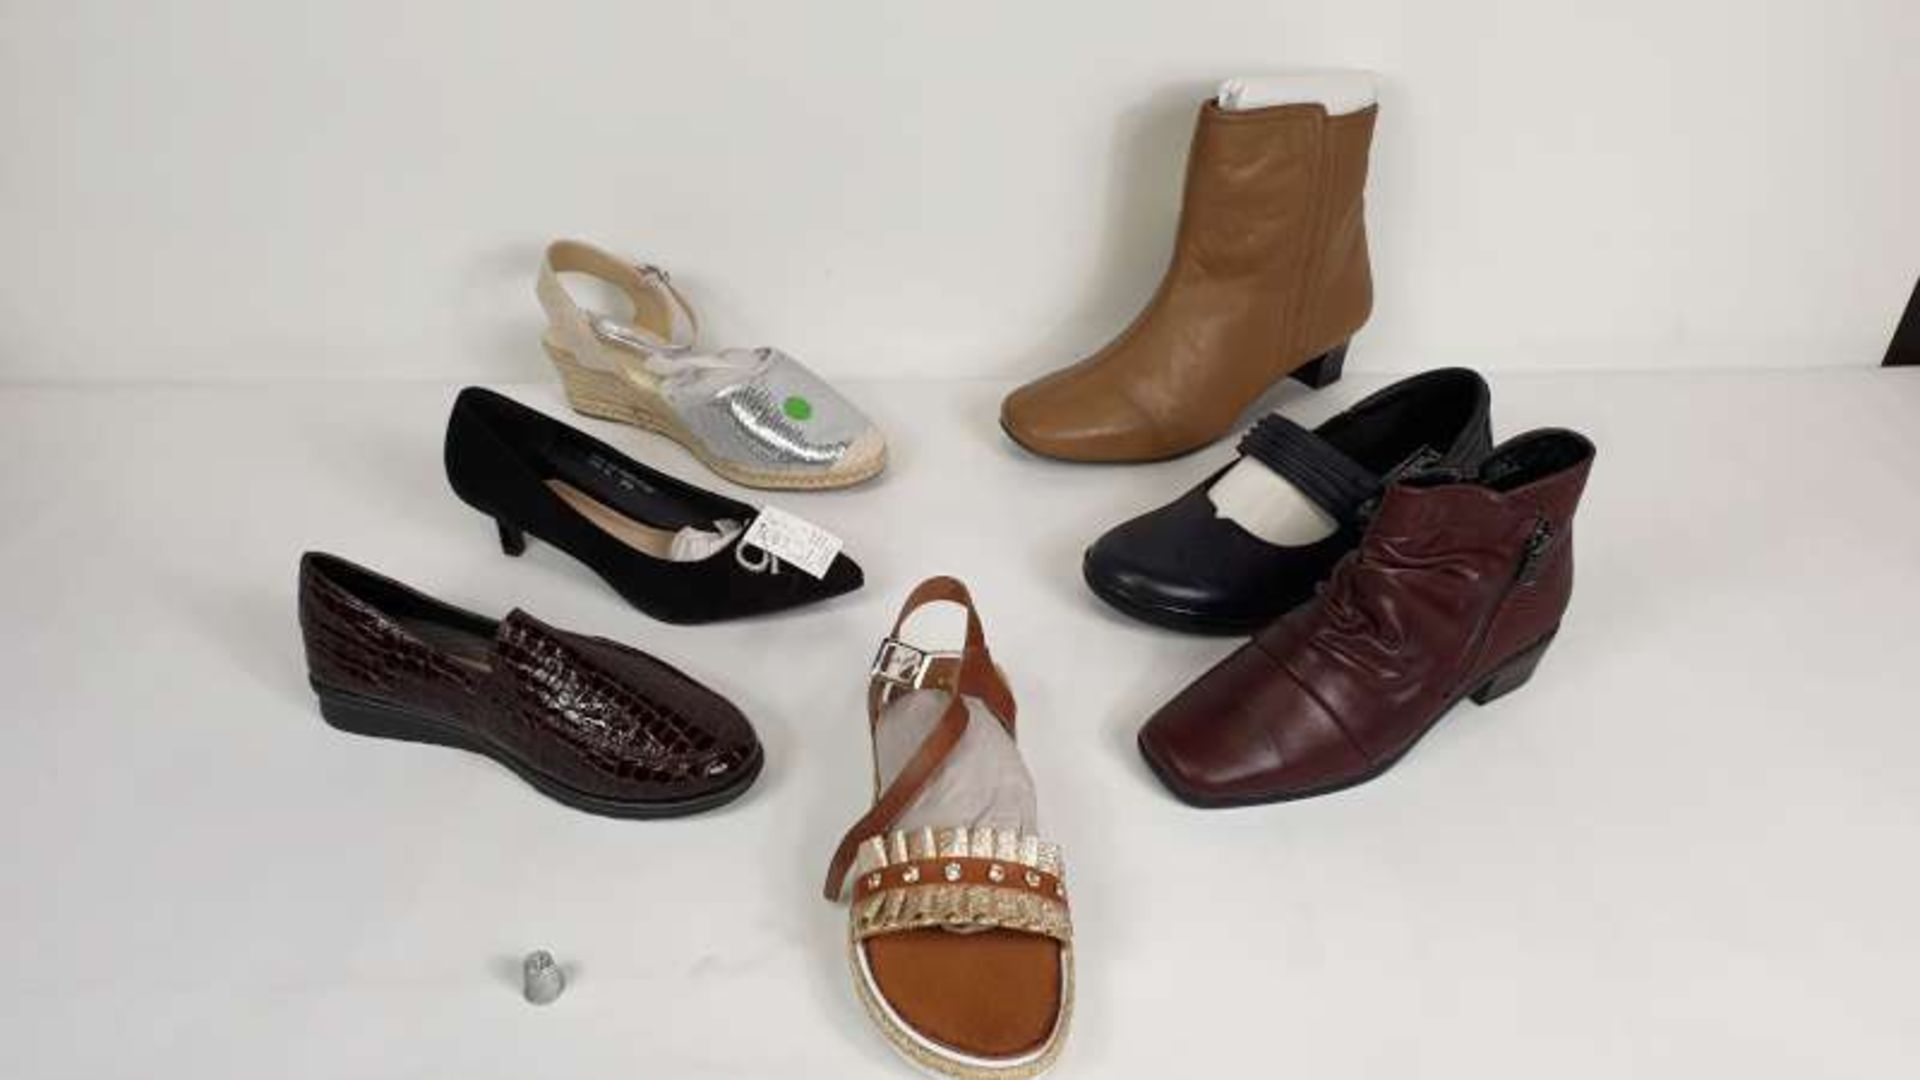 40 X PAIRS OF SHOES IN VARIOUS STYLES / COLOURS / SIZES